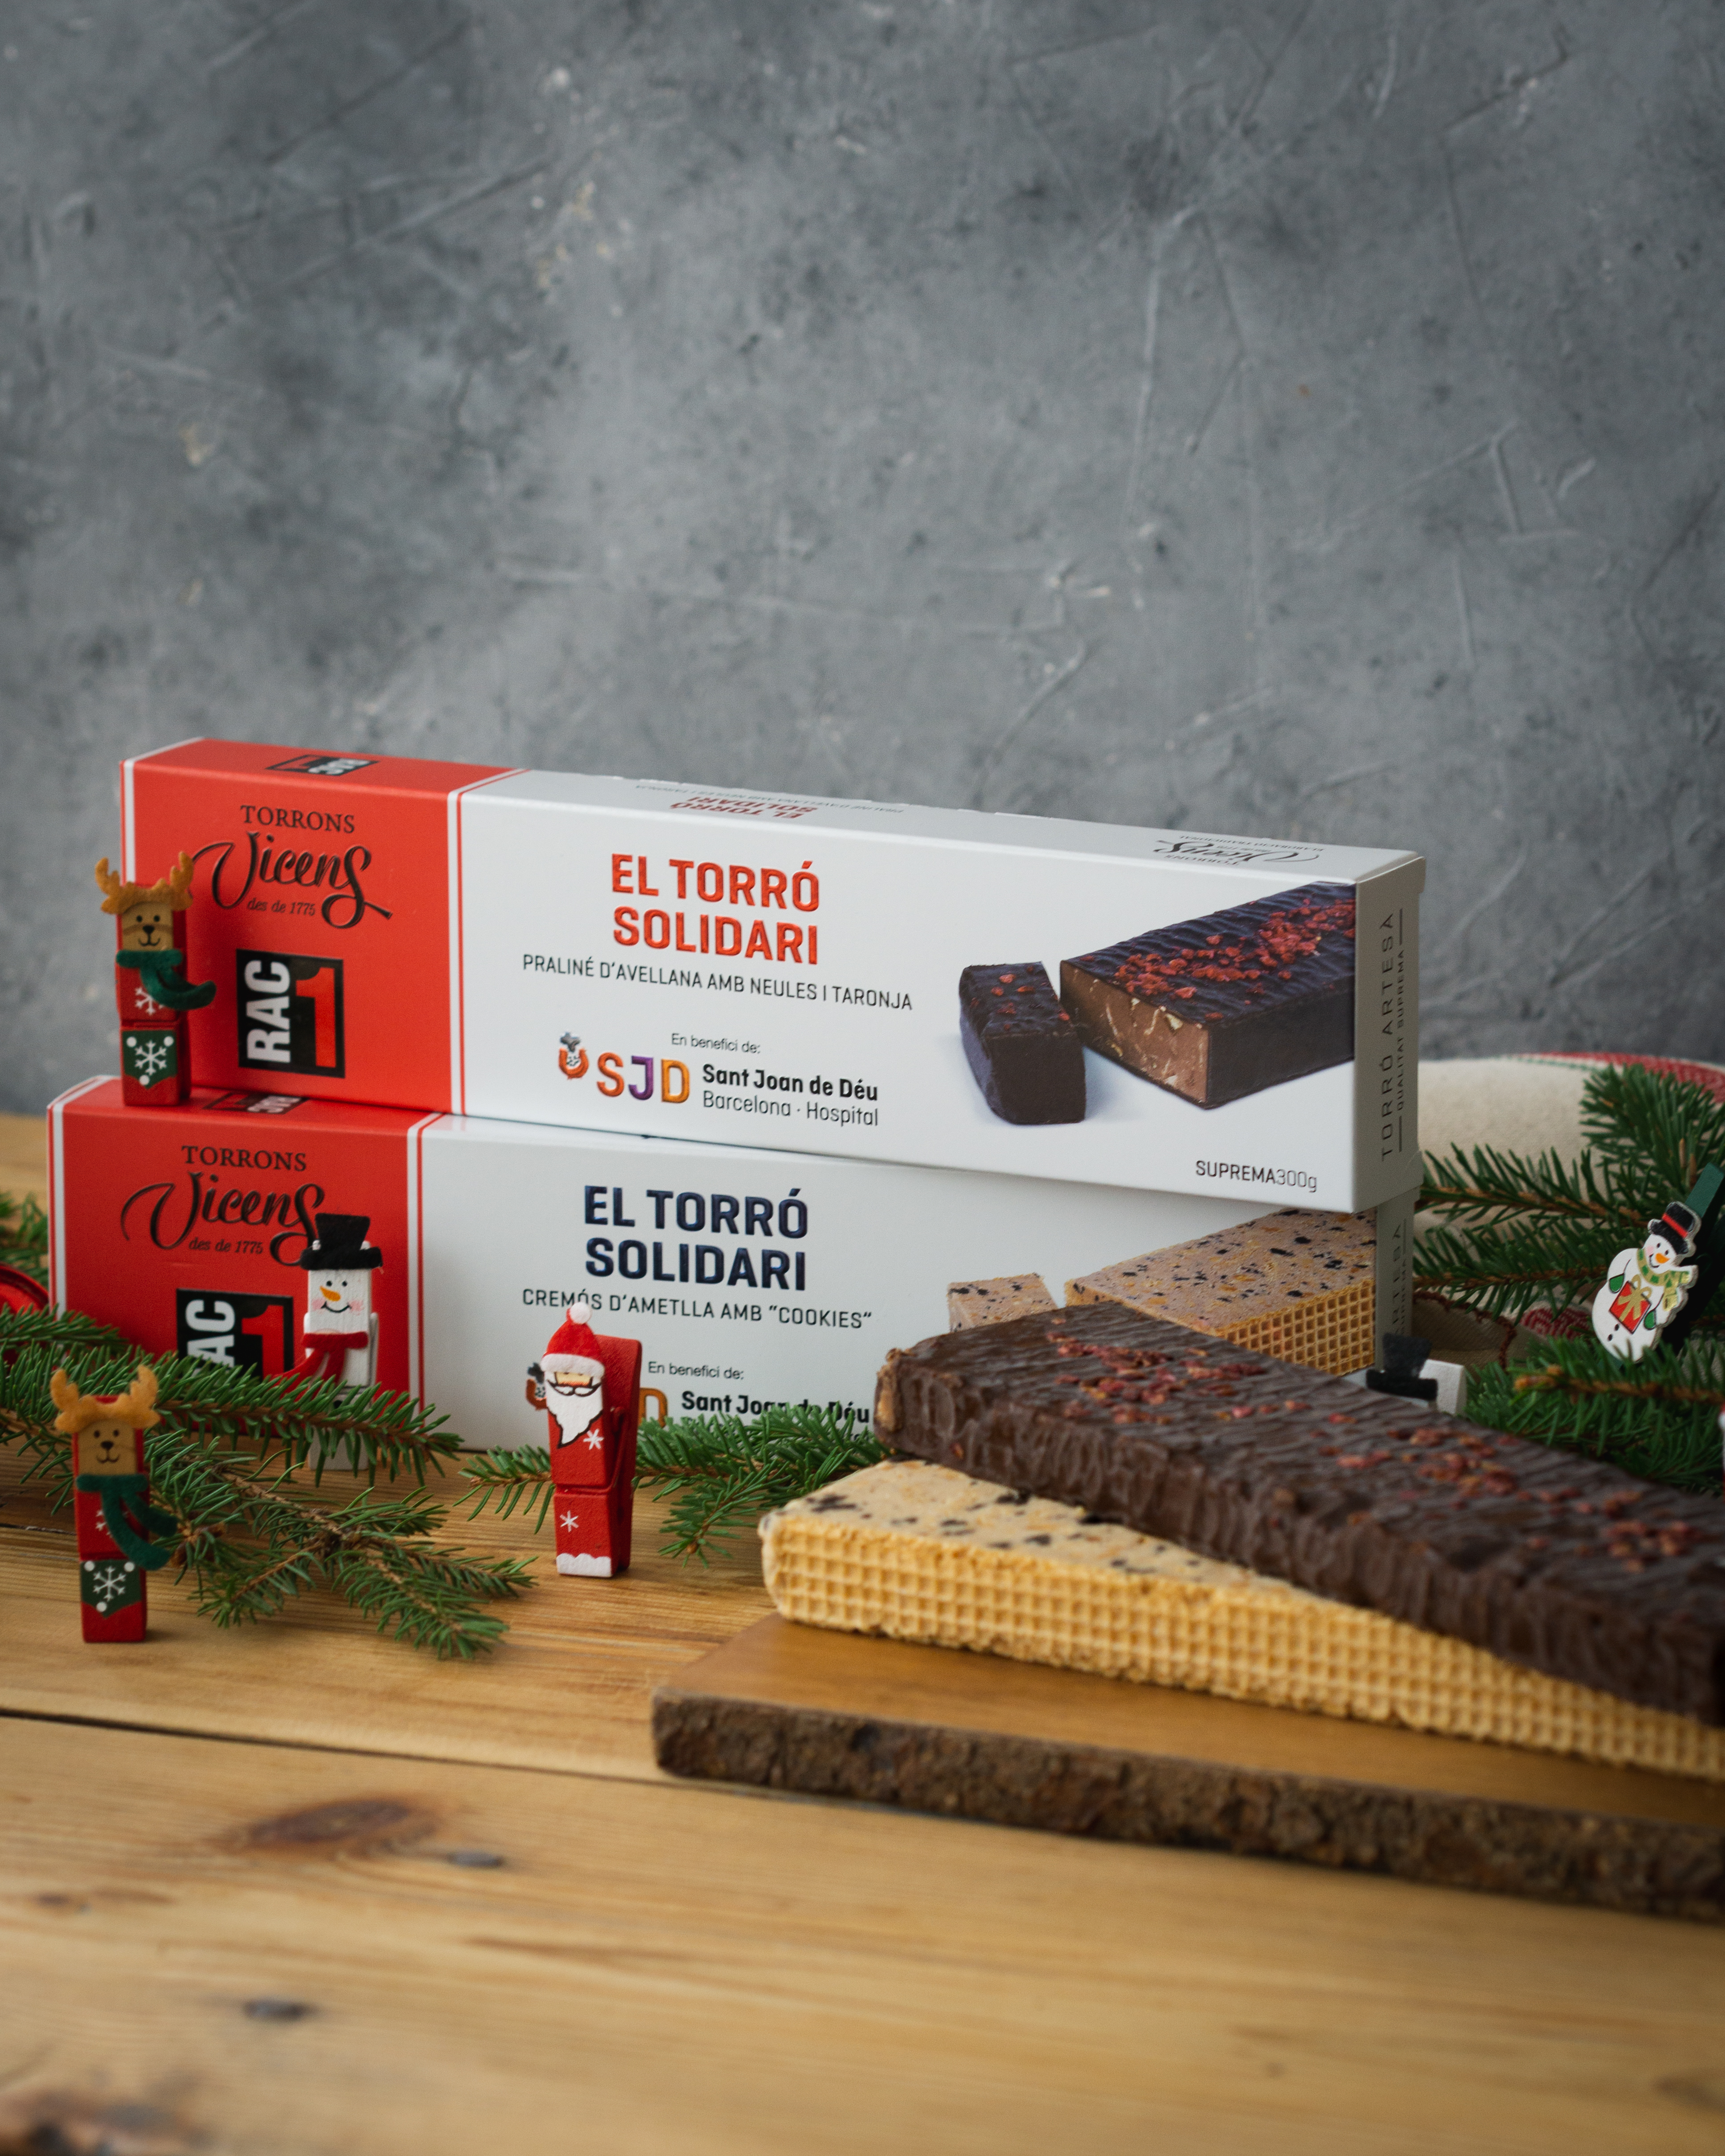 We present the eighth edition of the RAC1 and Torrons Vicens Solidarity Nougat